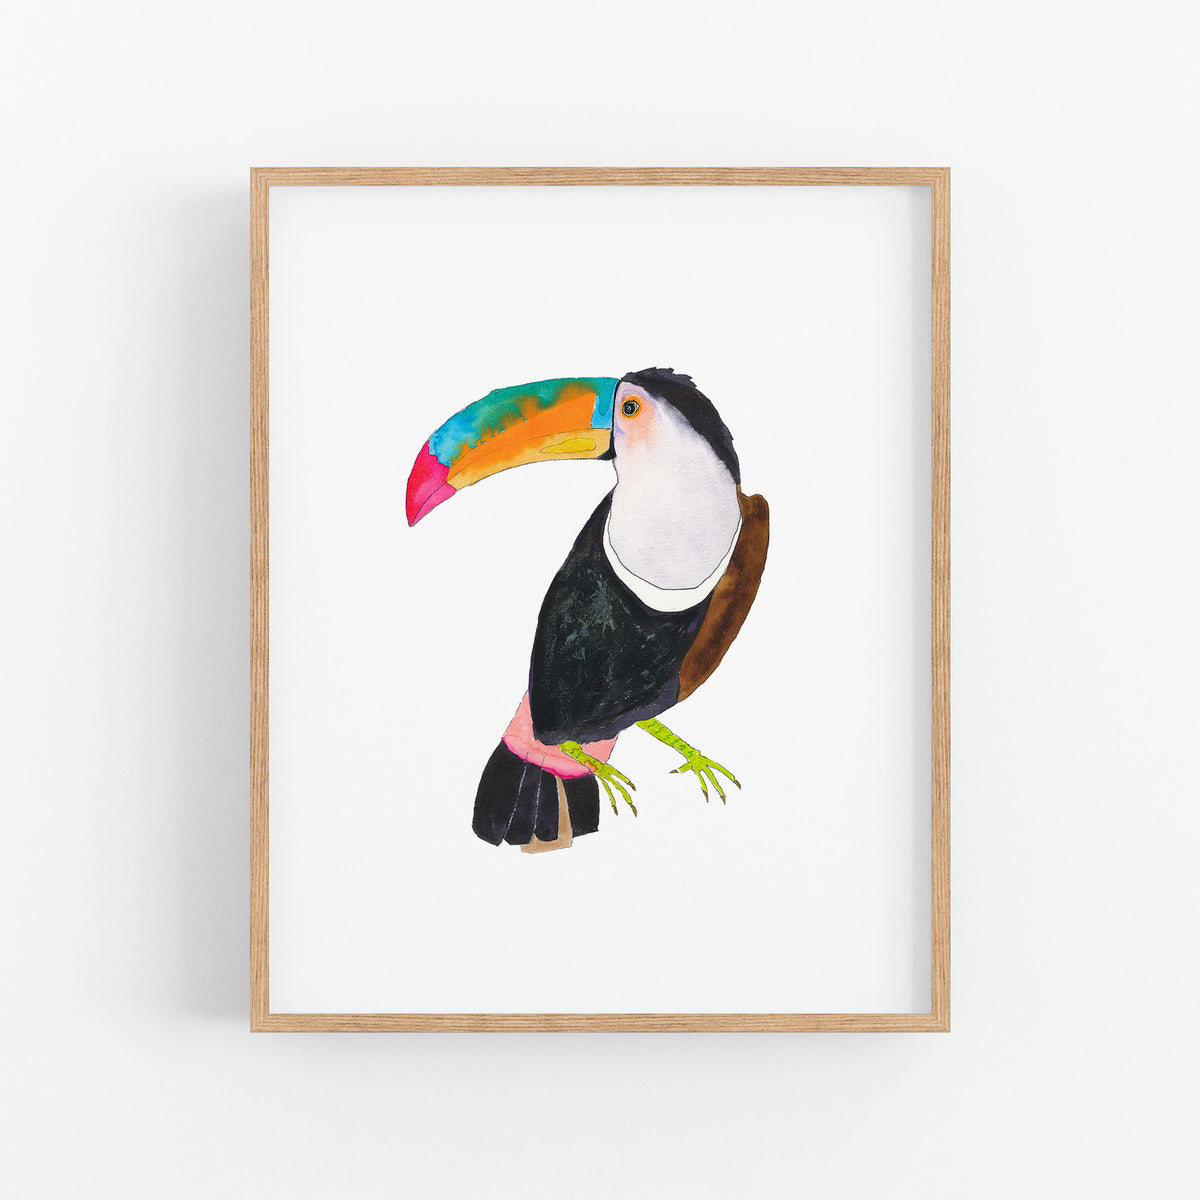 a picture of a toucan bird with a colorful beak